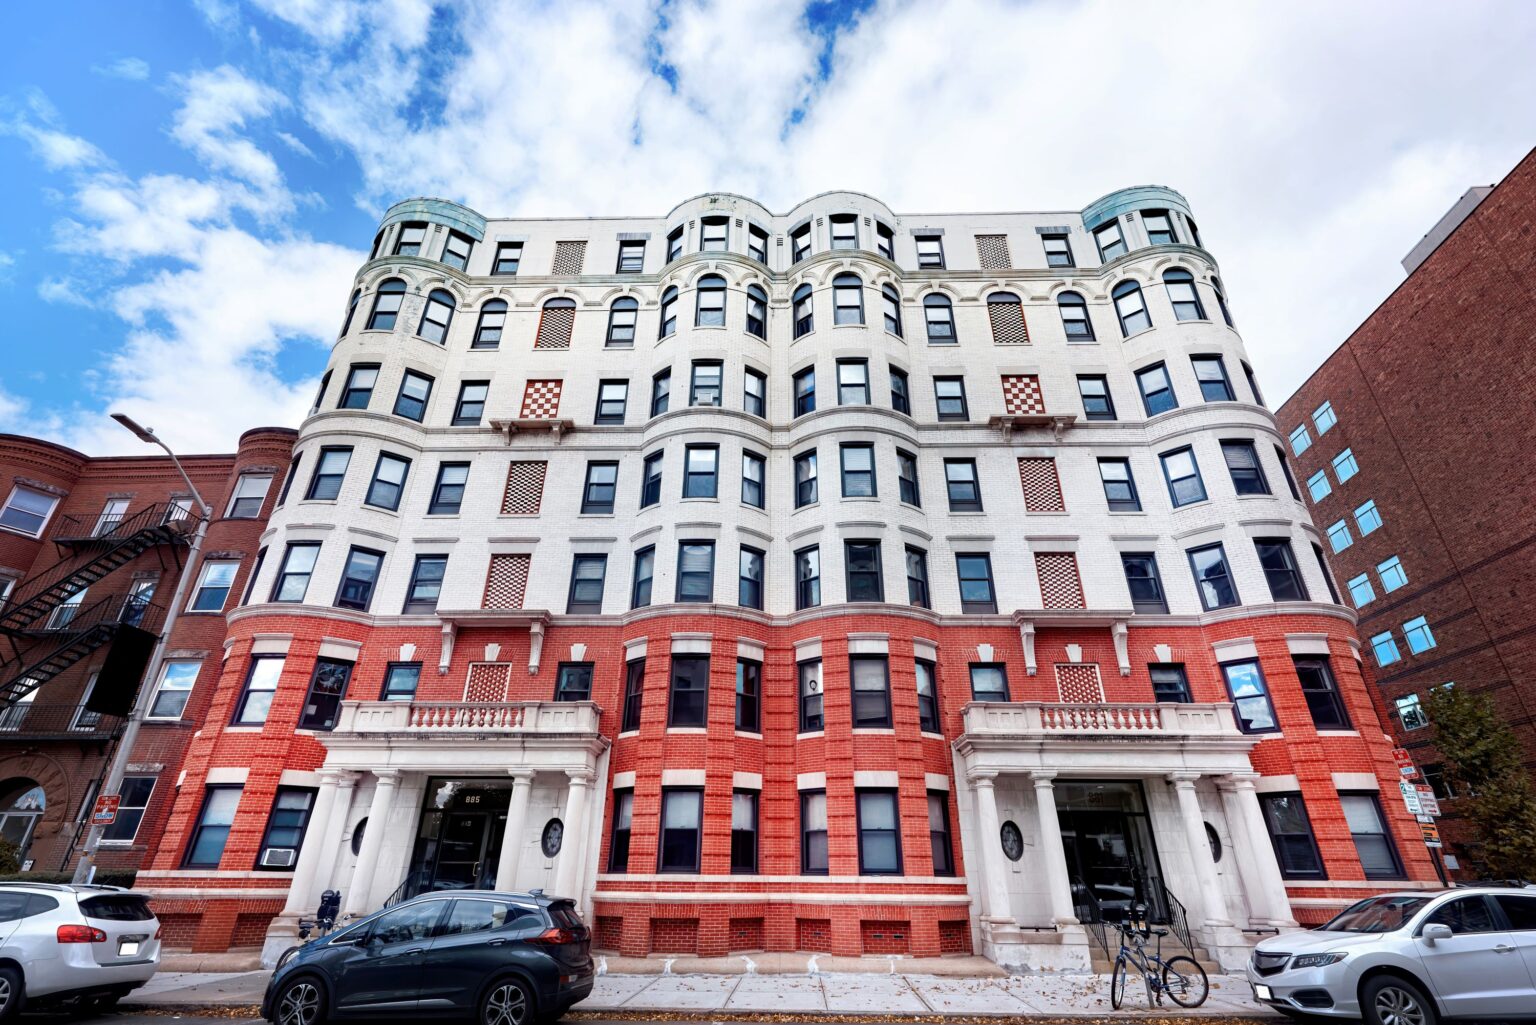 A Beautiful 6 Story Building in Manhattan With Cream and Orange Facade